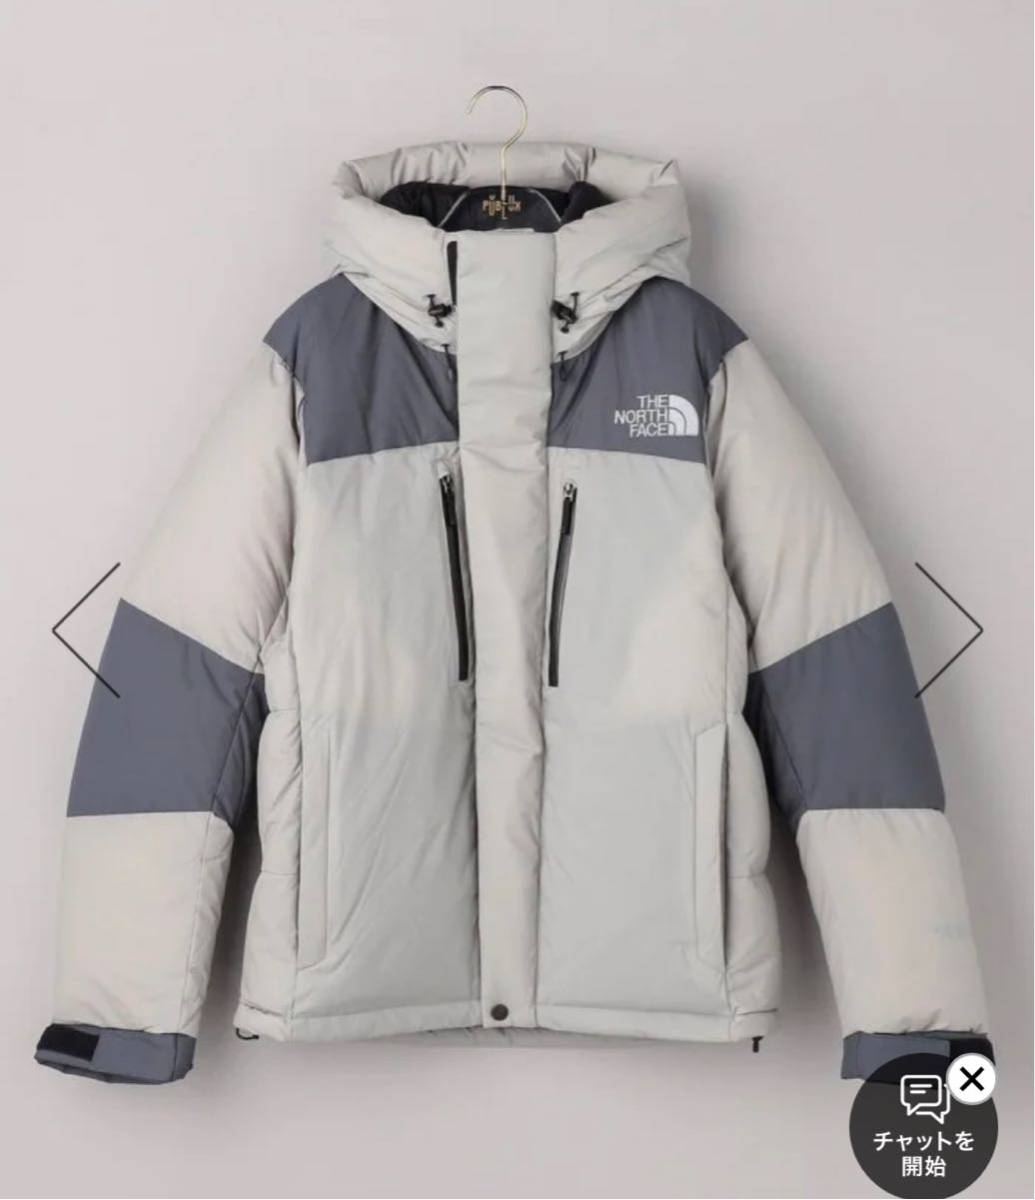 BaltroLTJKT/ND92240/バルトロライトジャケット　sサイズ THE NORTH FACE